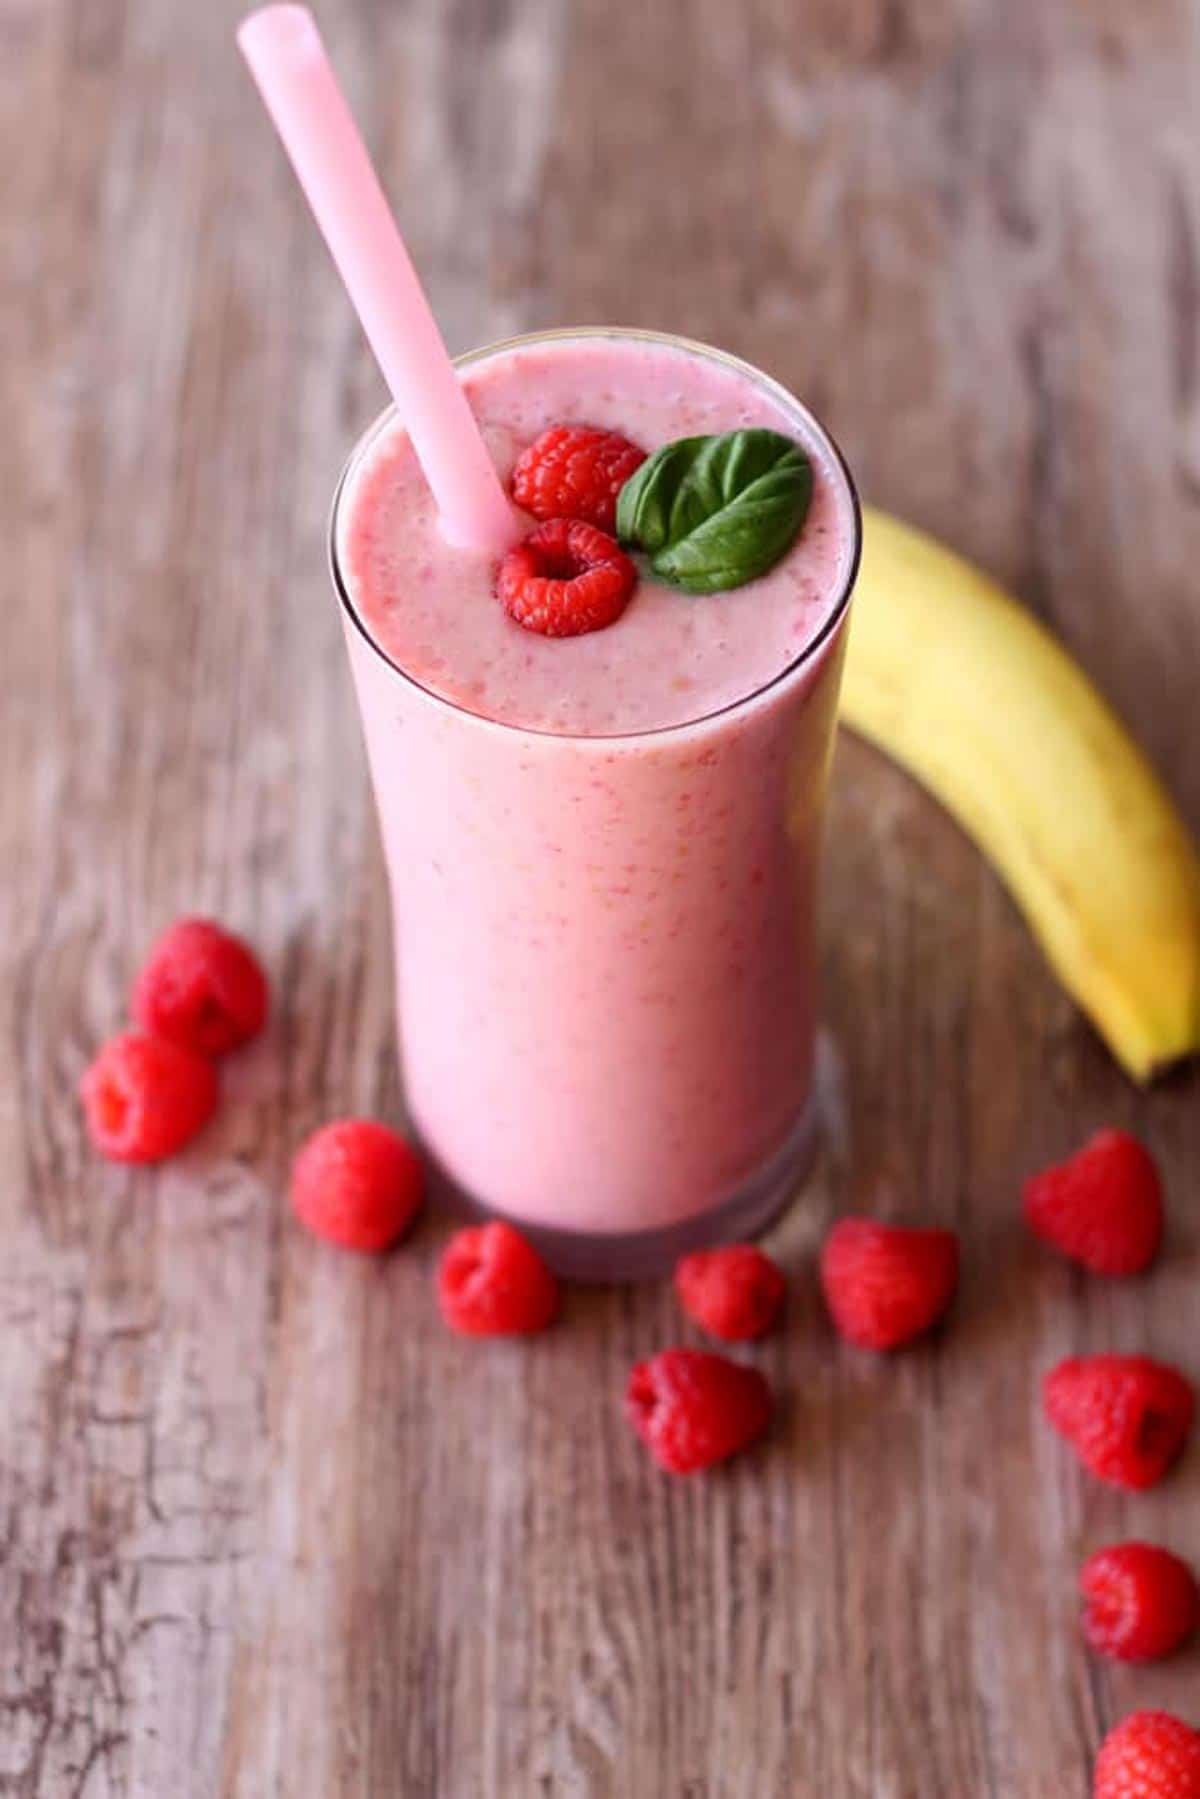 Glass containing a berry smoothie topped with 2 raspberries and a mint spring, berries and banana on a wooden table.